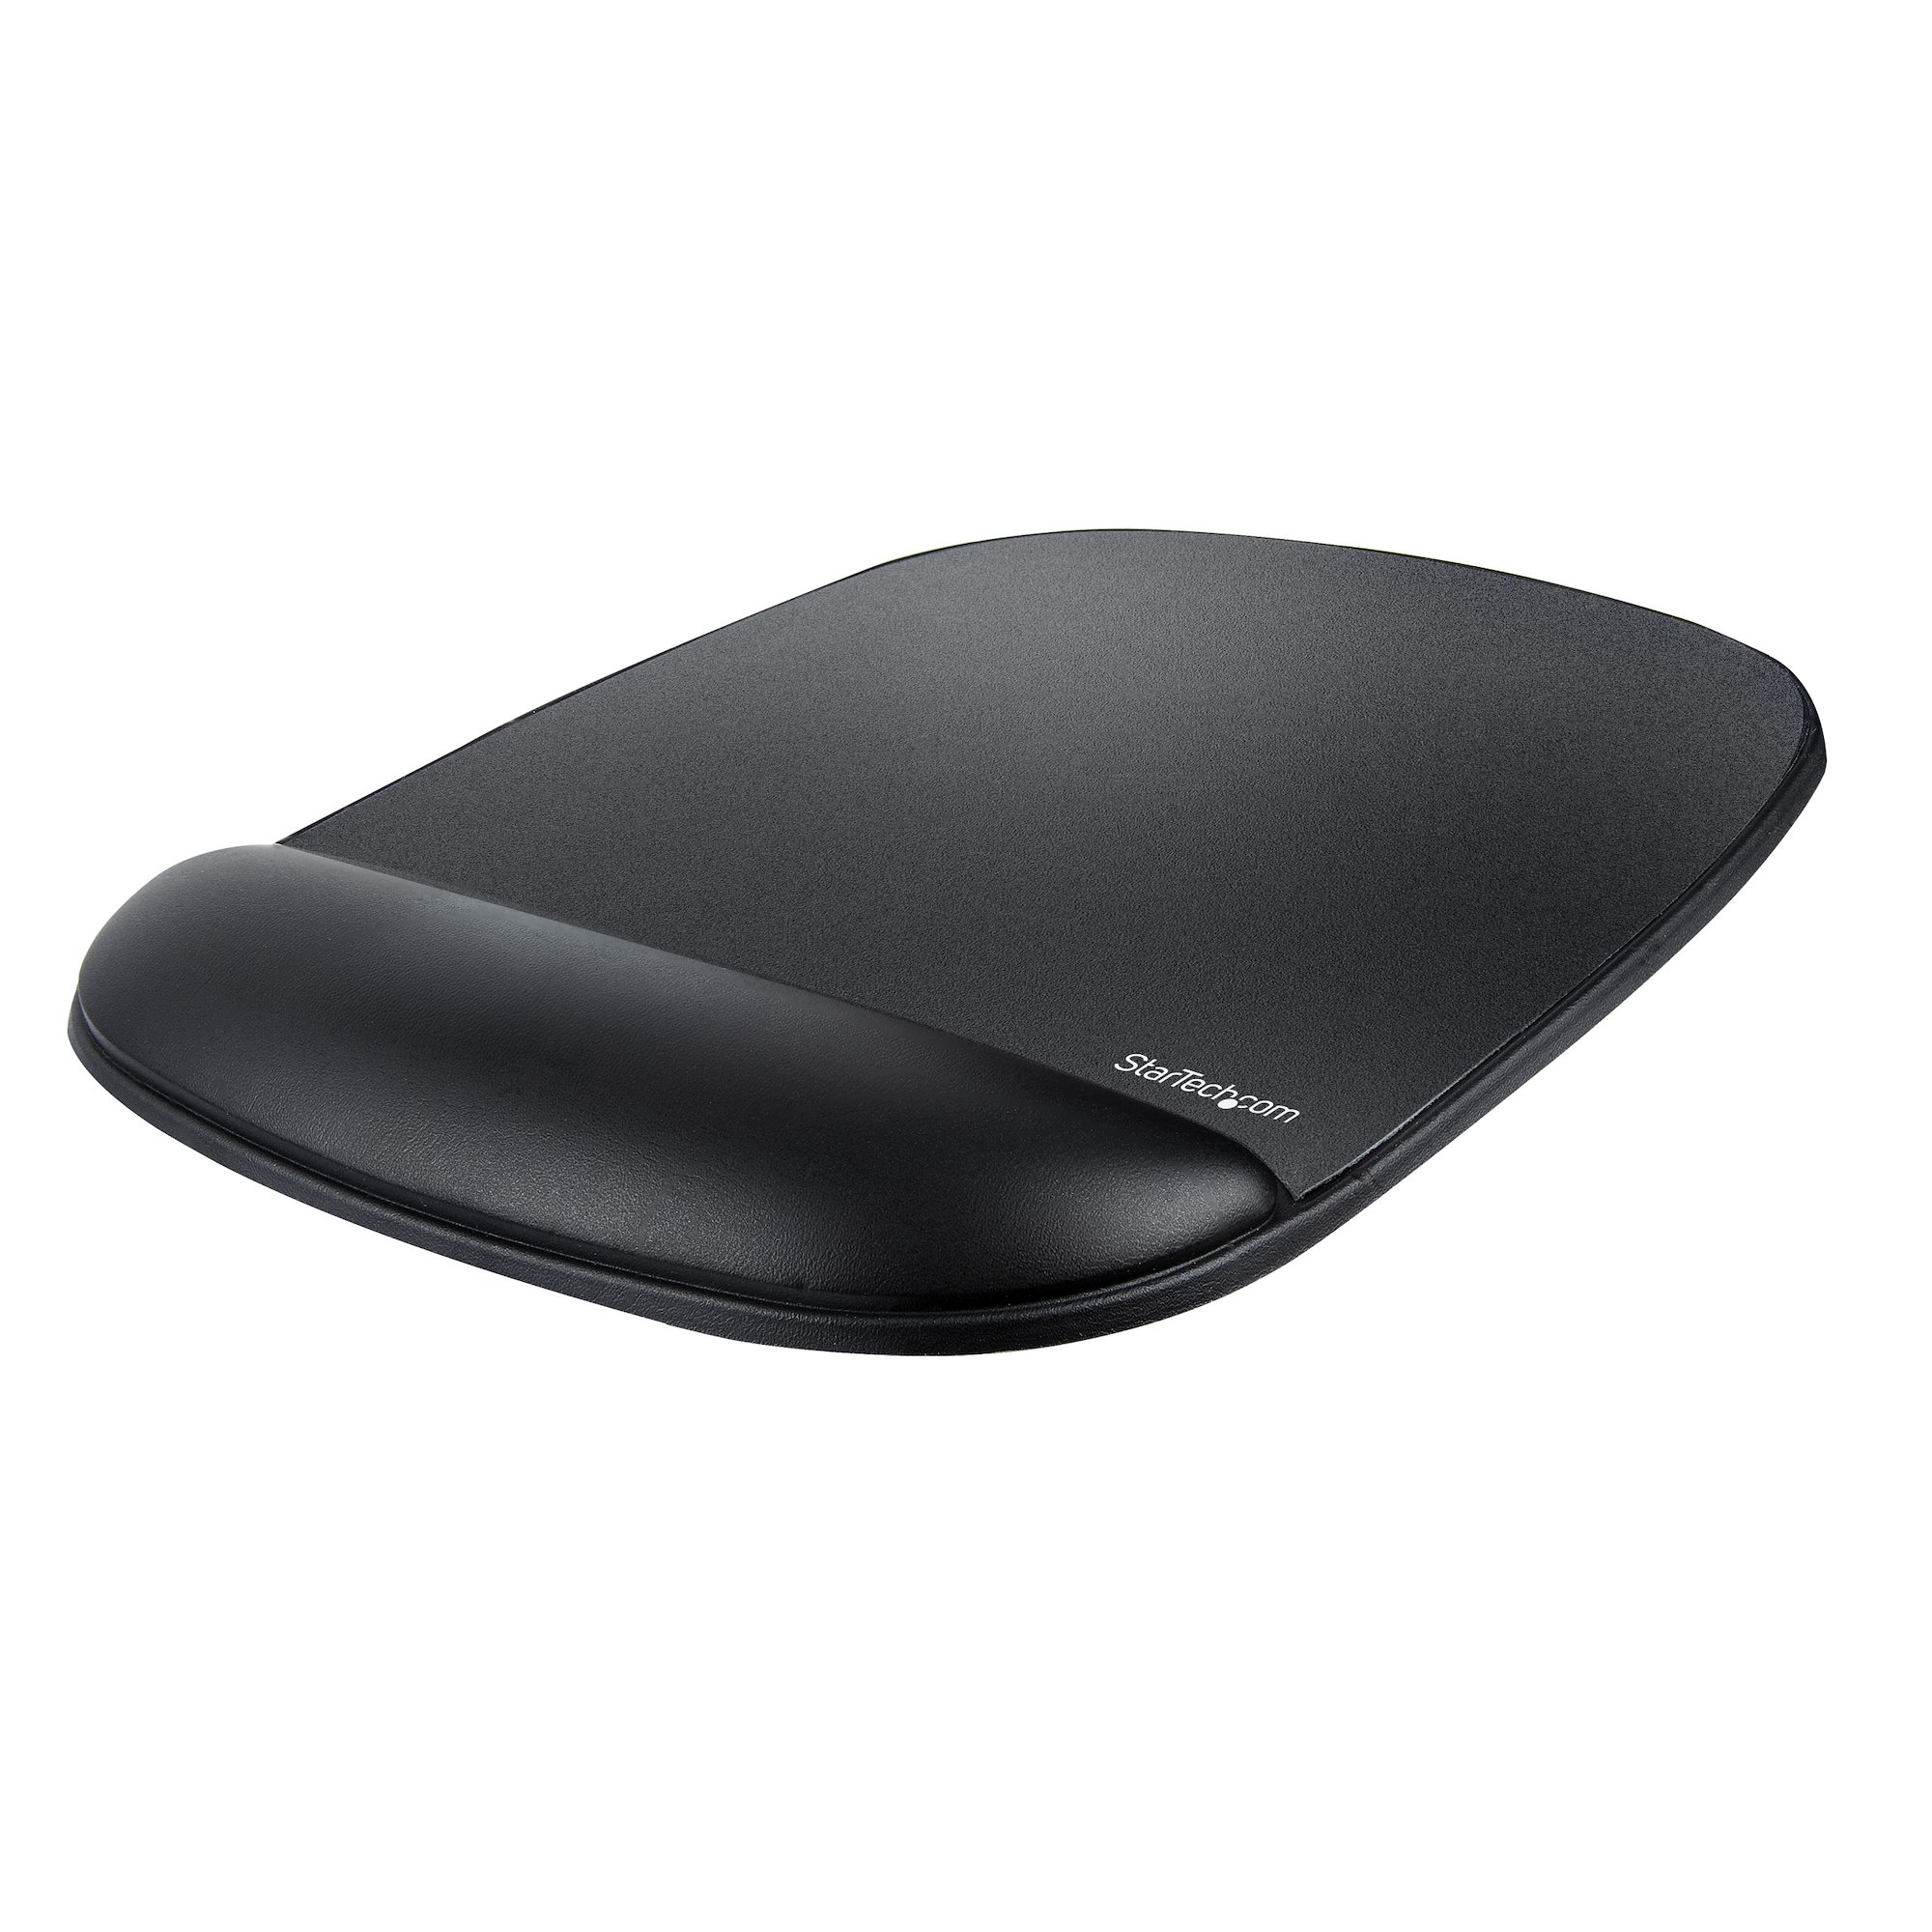 Ergonomic Mouse Pad with Wrist Rest Support Mydours Memory Foam Non-Slip Rubber Base Wrist Rest Pad for Home Office Easy Typing & Pain Relief 